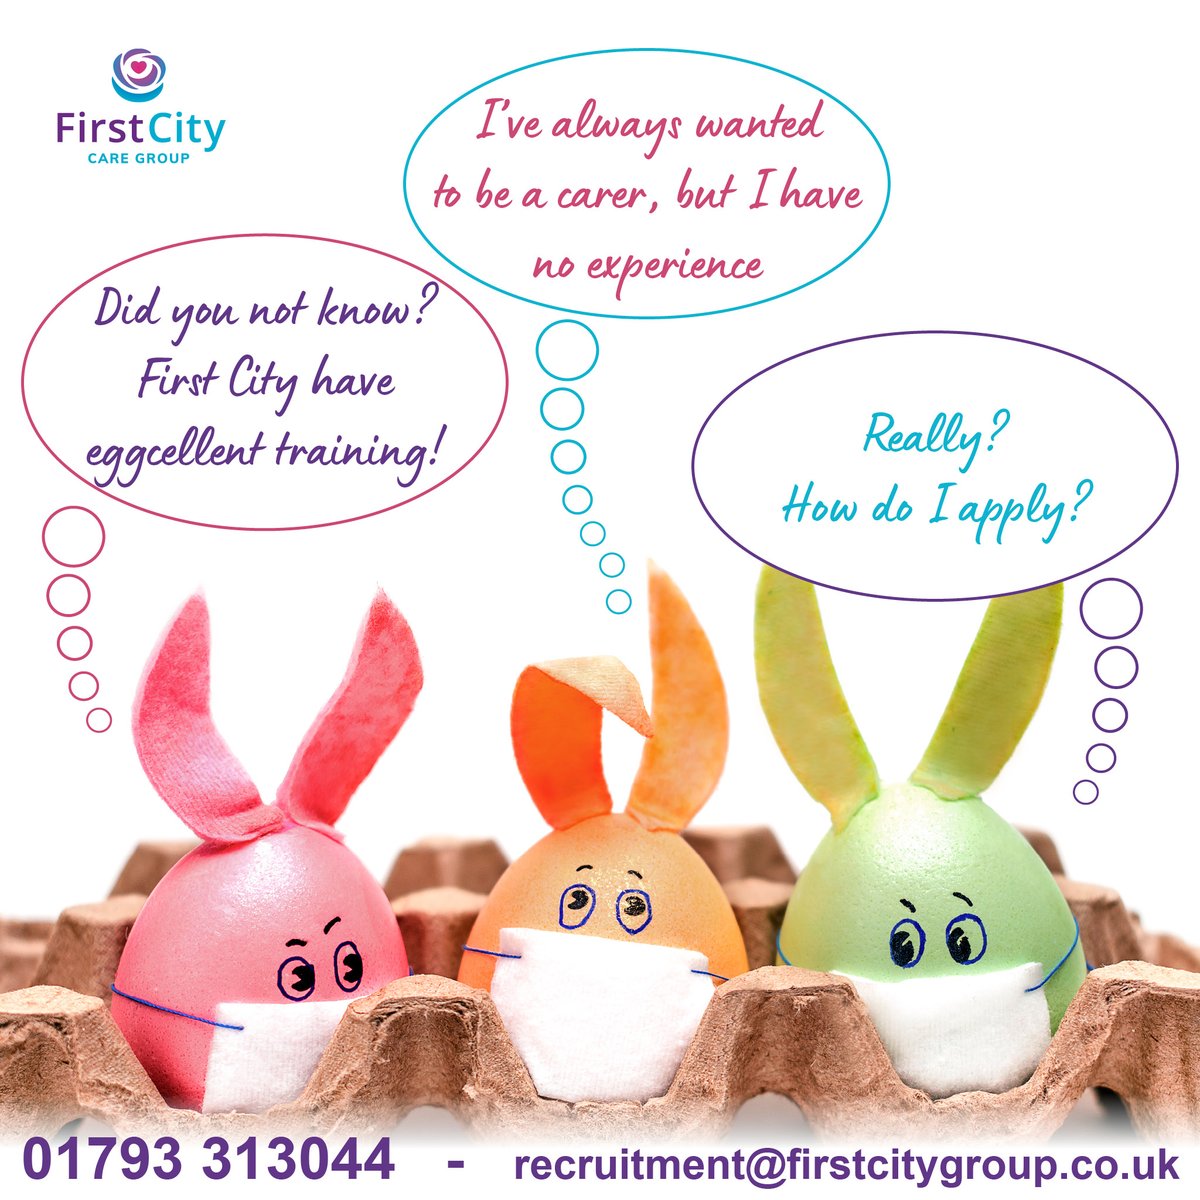 How do you apply? Well that's simple...Hop on over to firstcitynursing.co.uk/jobs/details/s… 🐇🐣

* Career Satisfaction
* Eggcellent Training
* Full-Time / Part-Time / Bank positions available

#recruitingnow #carework #careworker #care #careerincare #readytowork #swindonjobs #swindon #jobs